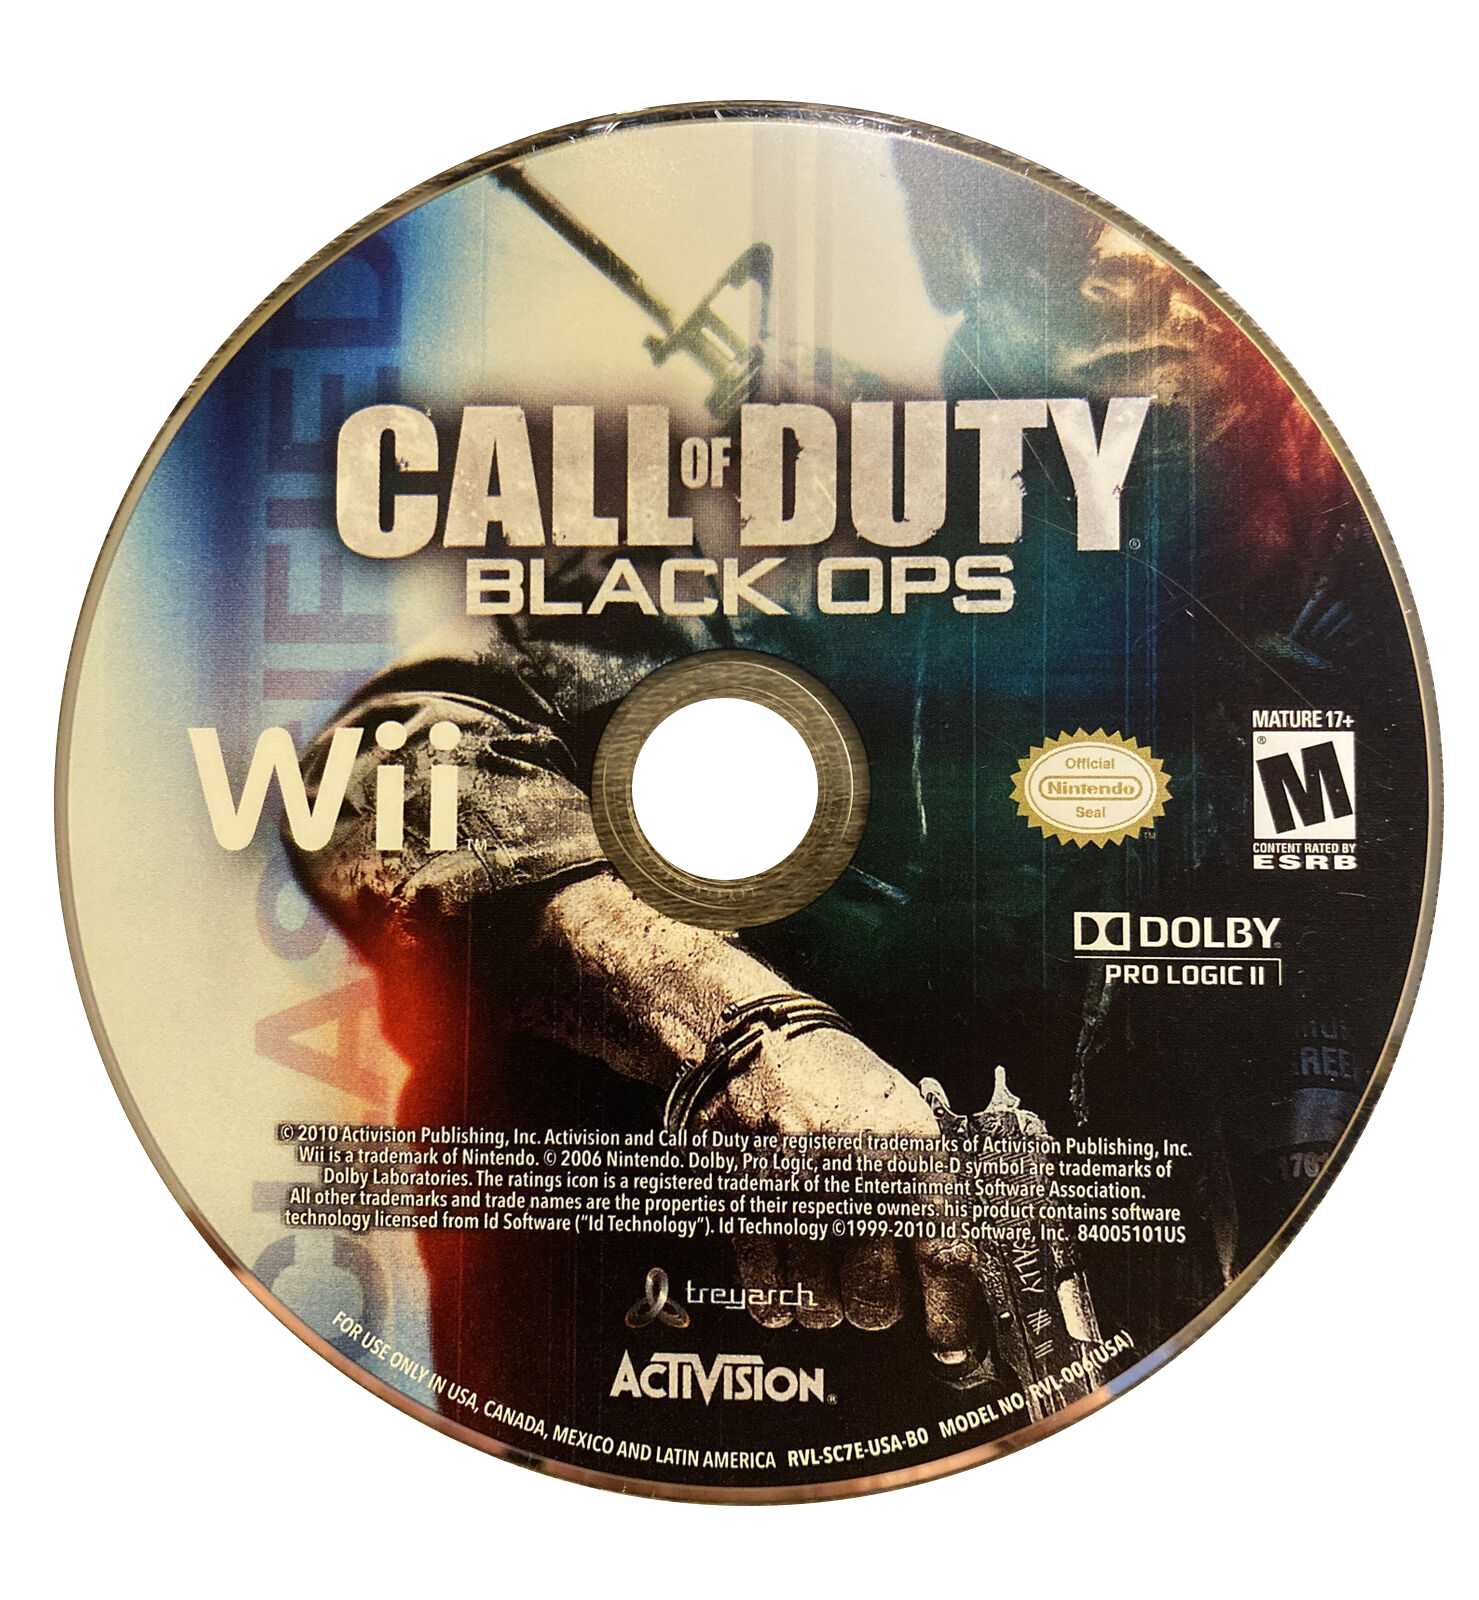 Call of Duty: Black Ops - Nintendo Wii Game